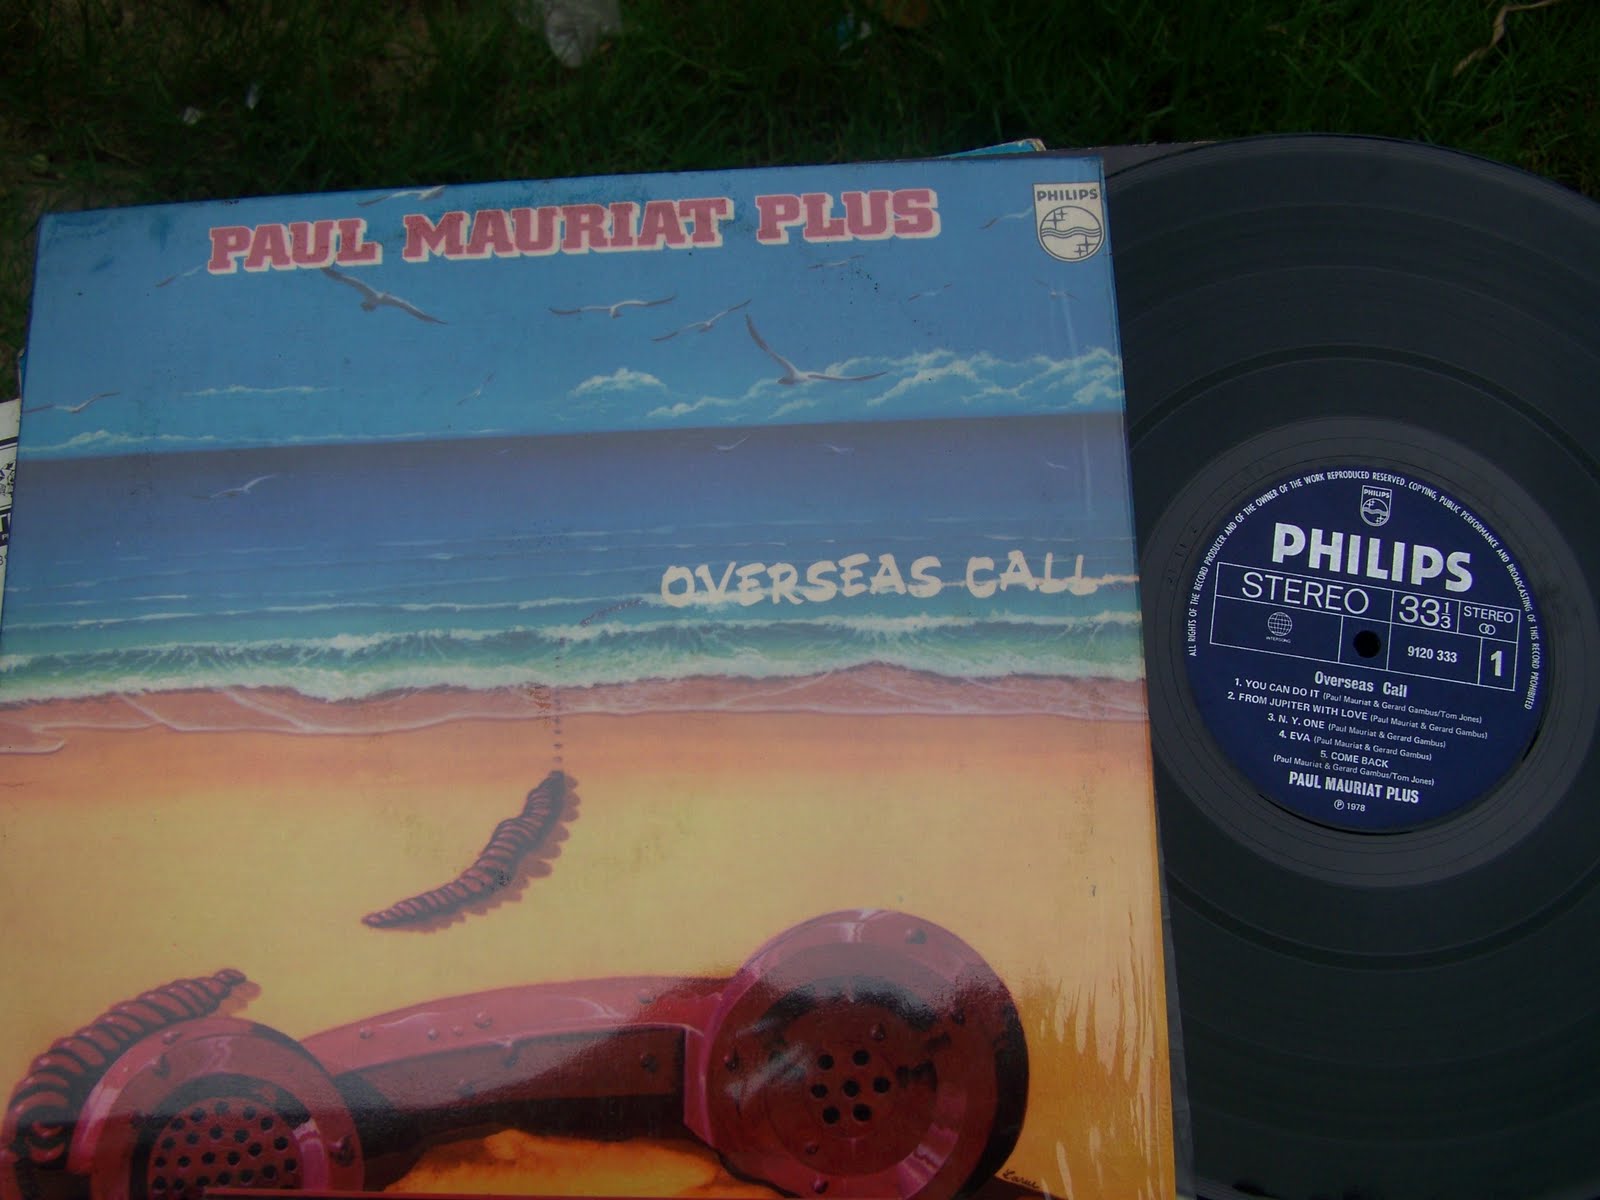 Paul mauriat mp3. Paul Mauriat Love is still Blue 1976. Paul Mauriat 1978-overseas Call. Paul Mauriat Covers. Paul Mauriat - i won't last a Day without you (1974).